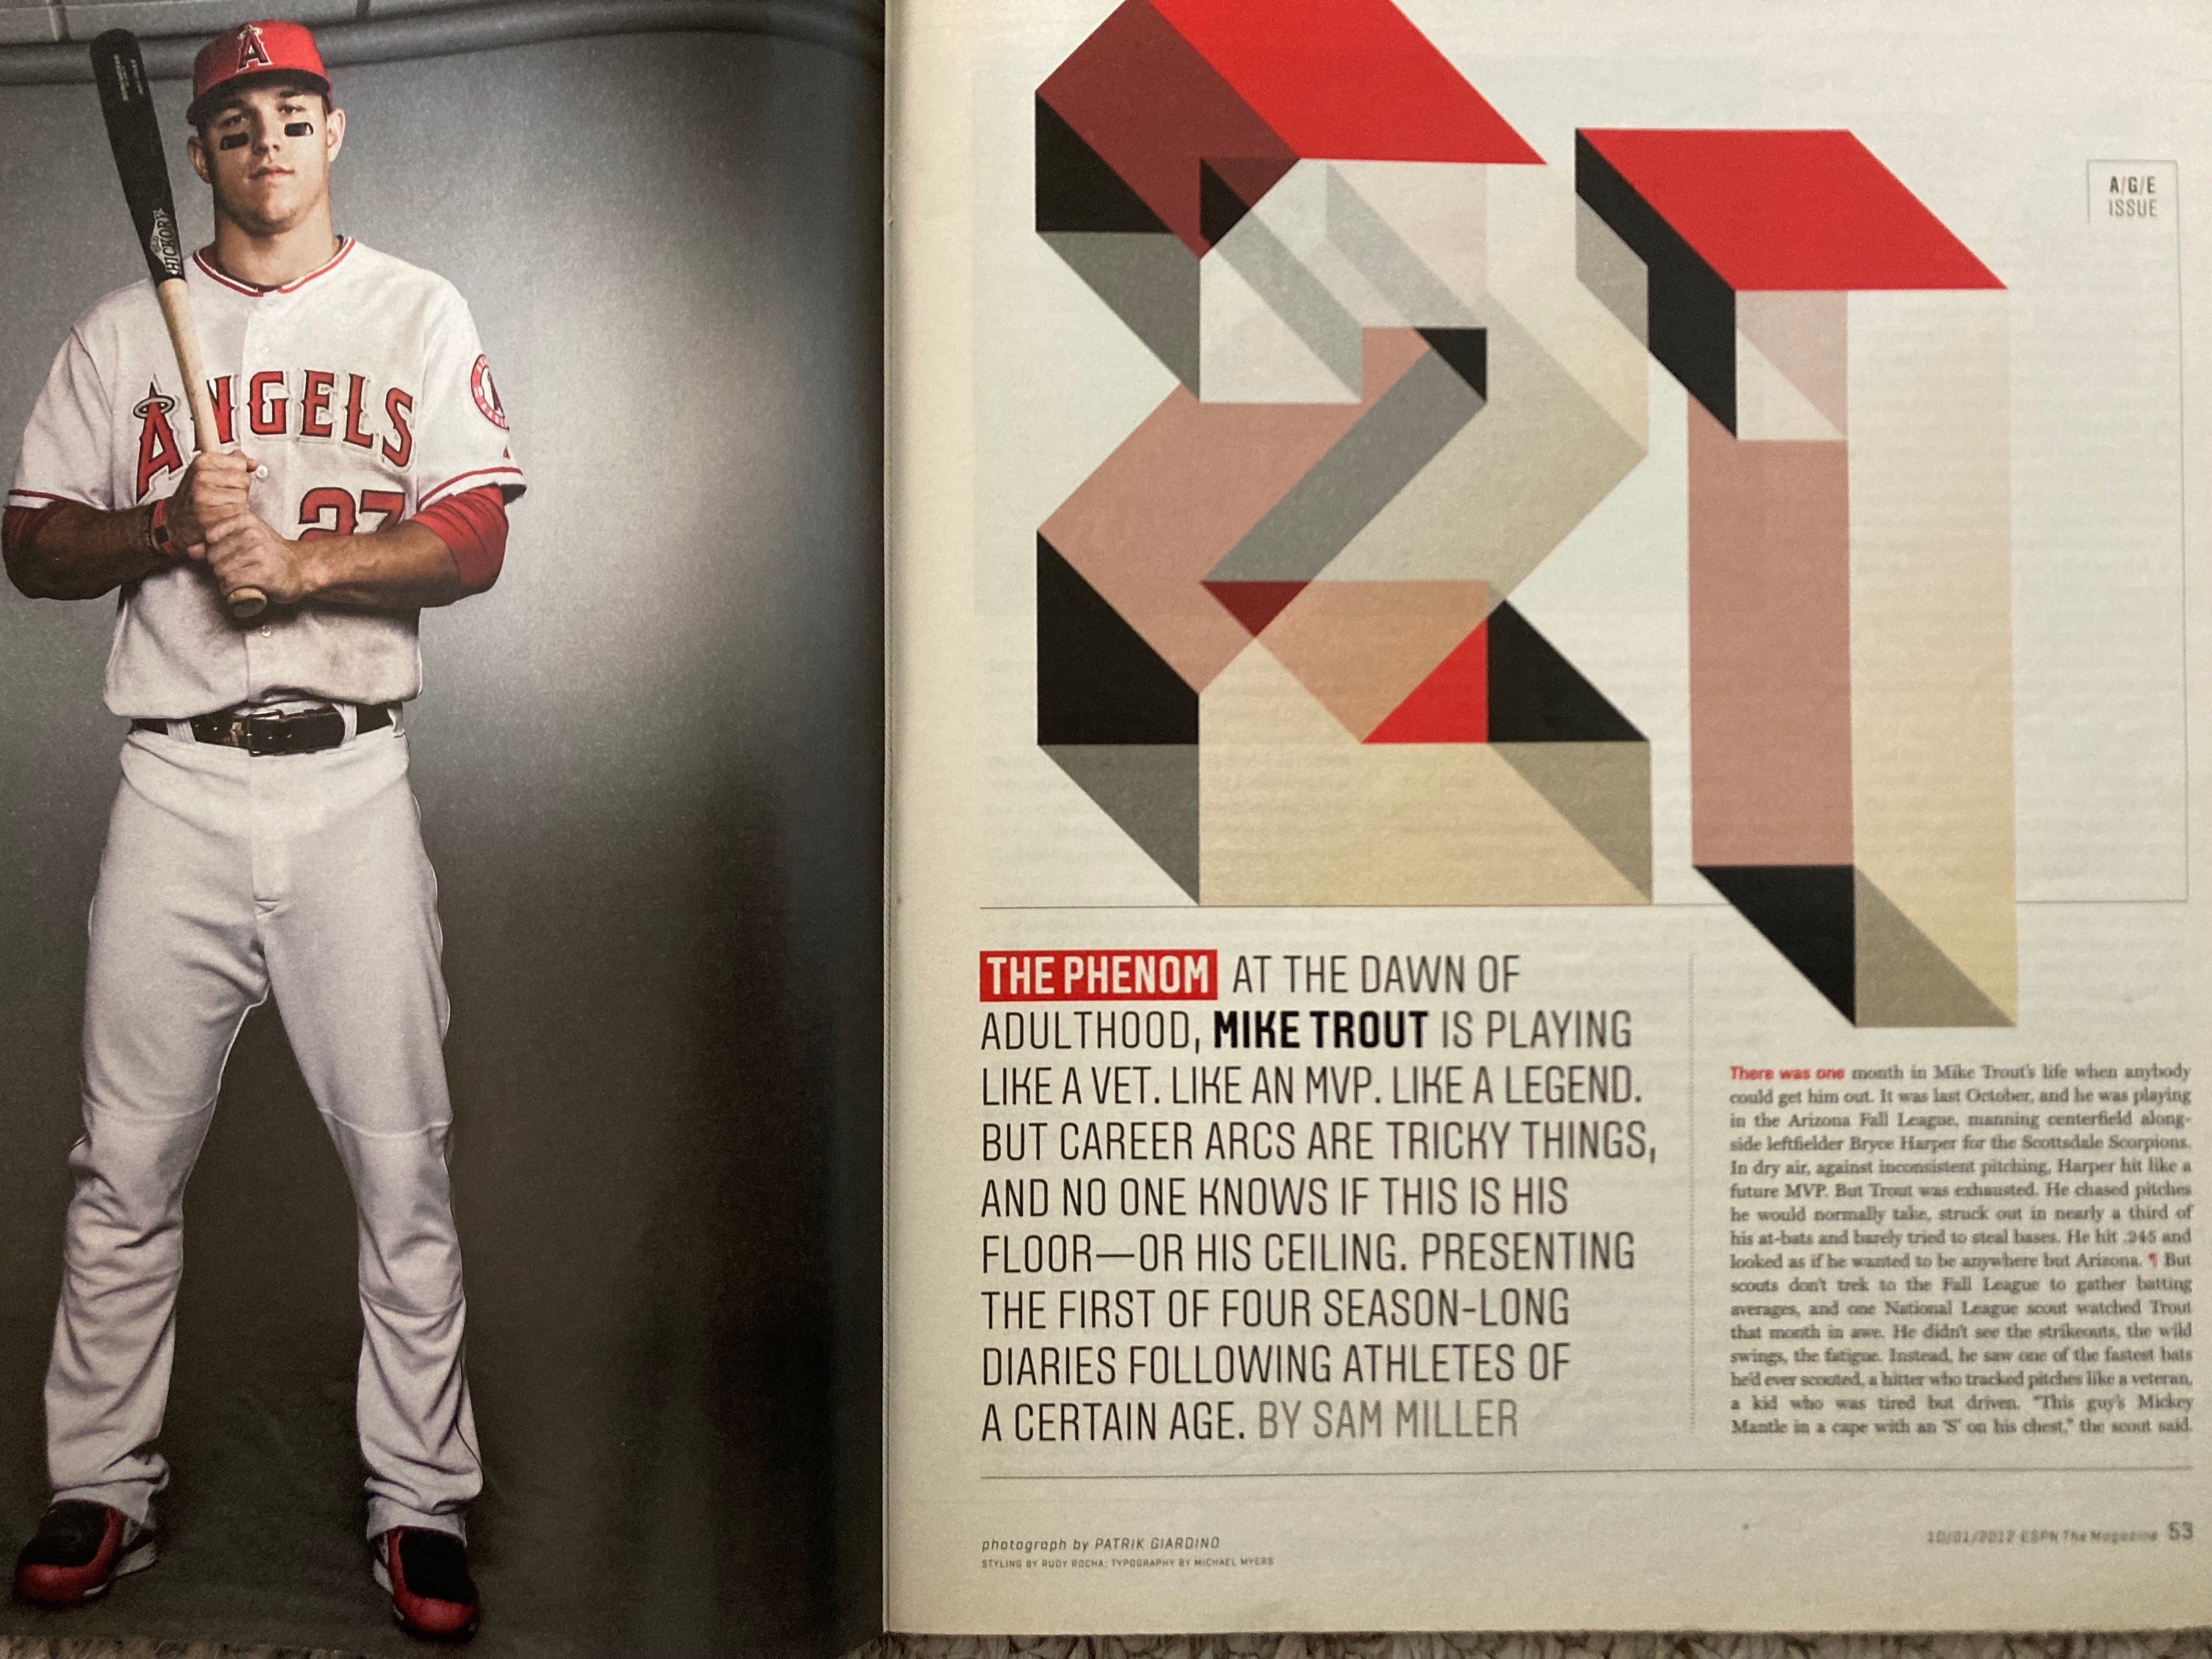 Baseball player Mike Trout is photographed for Body Armor on